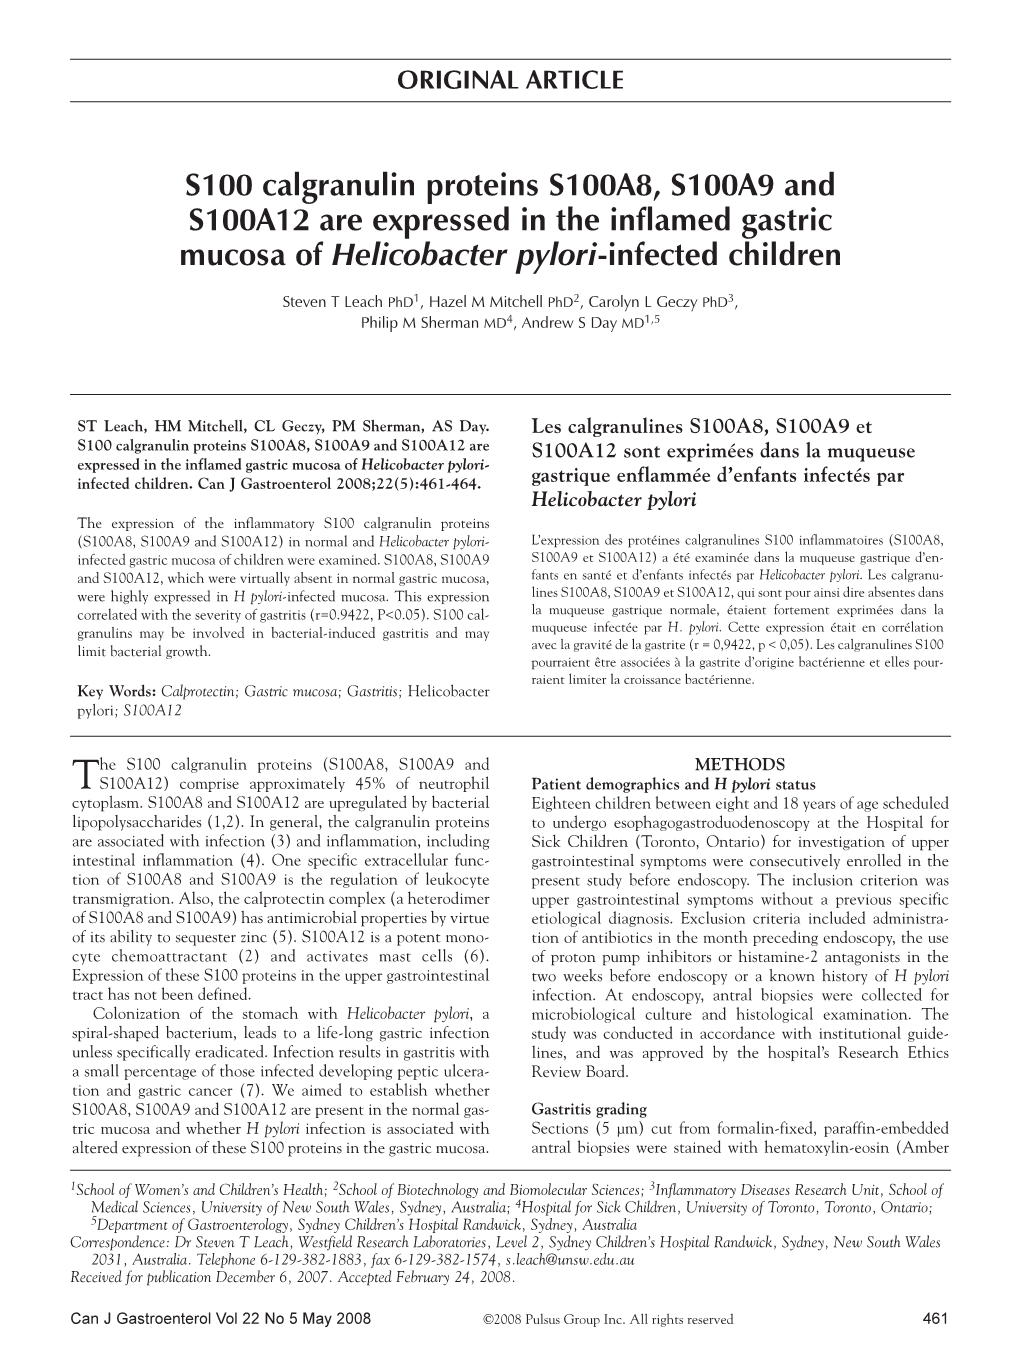 S100 Calgranulin Proteins S100A8, S100A9 and S100A12 Are Expressed in the Inflamed Gastric Mucosa of Helicobacter Pylori-Infected Children